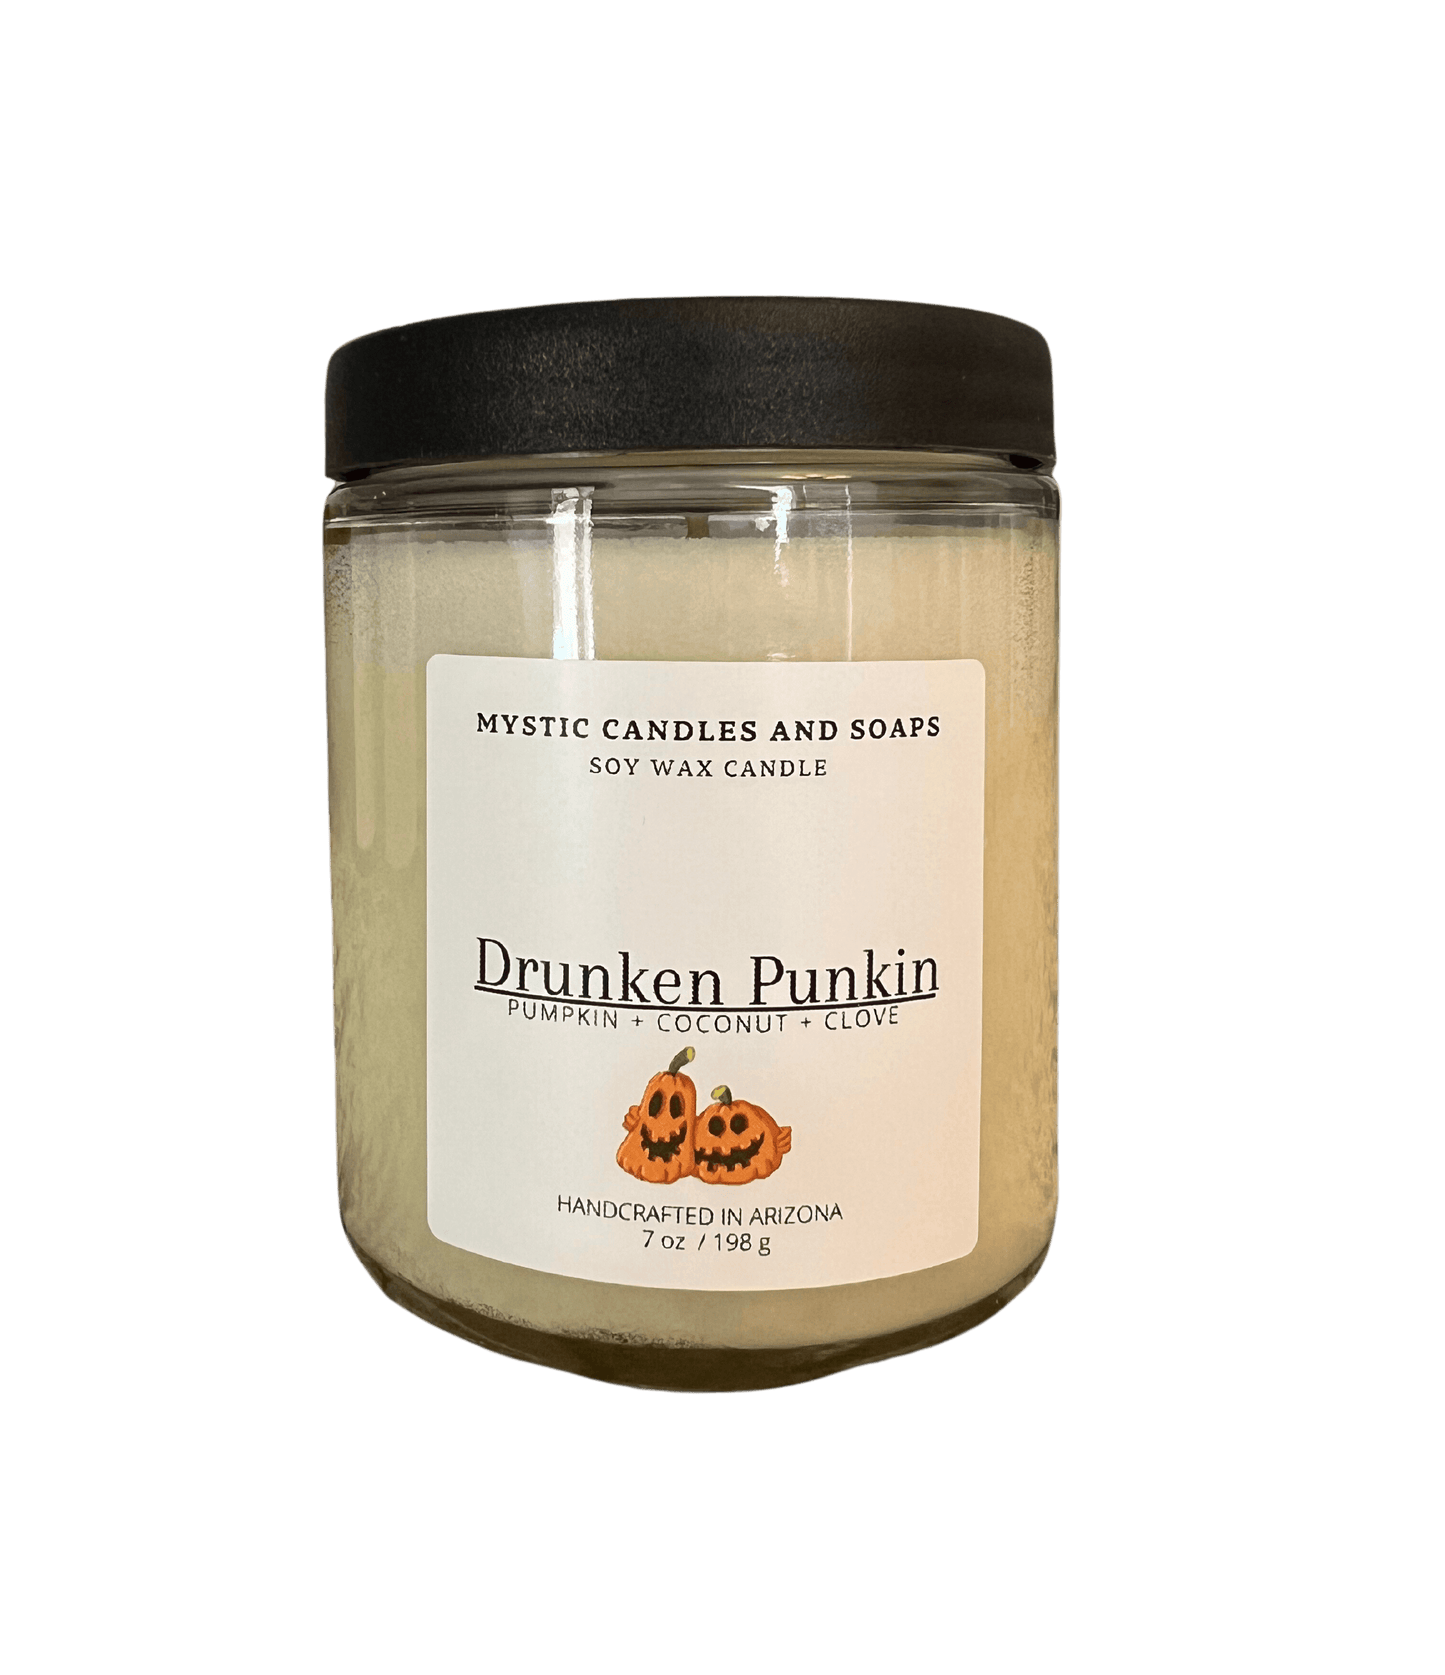 Drunken Punkin Candle - Mystic Candles and Soaps LLC